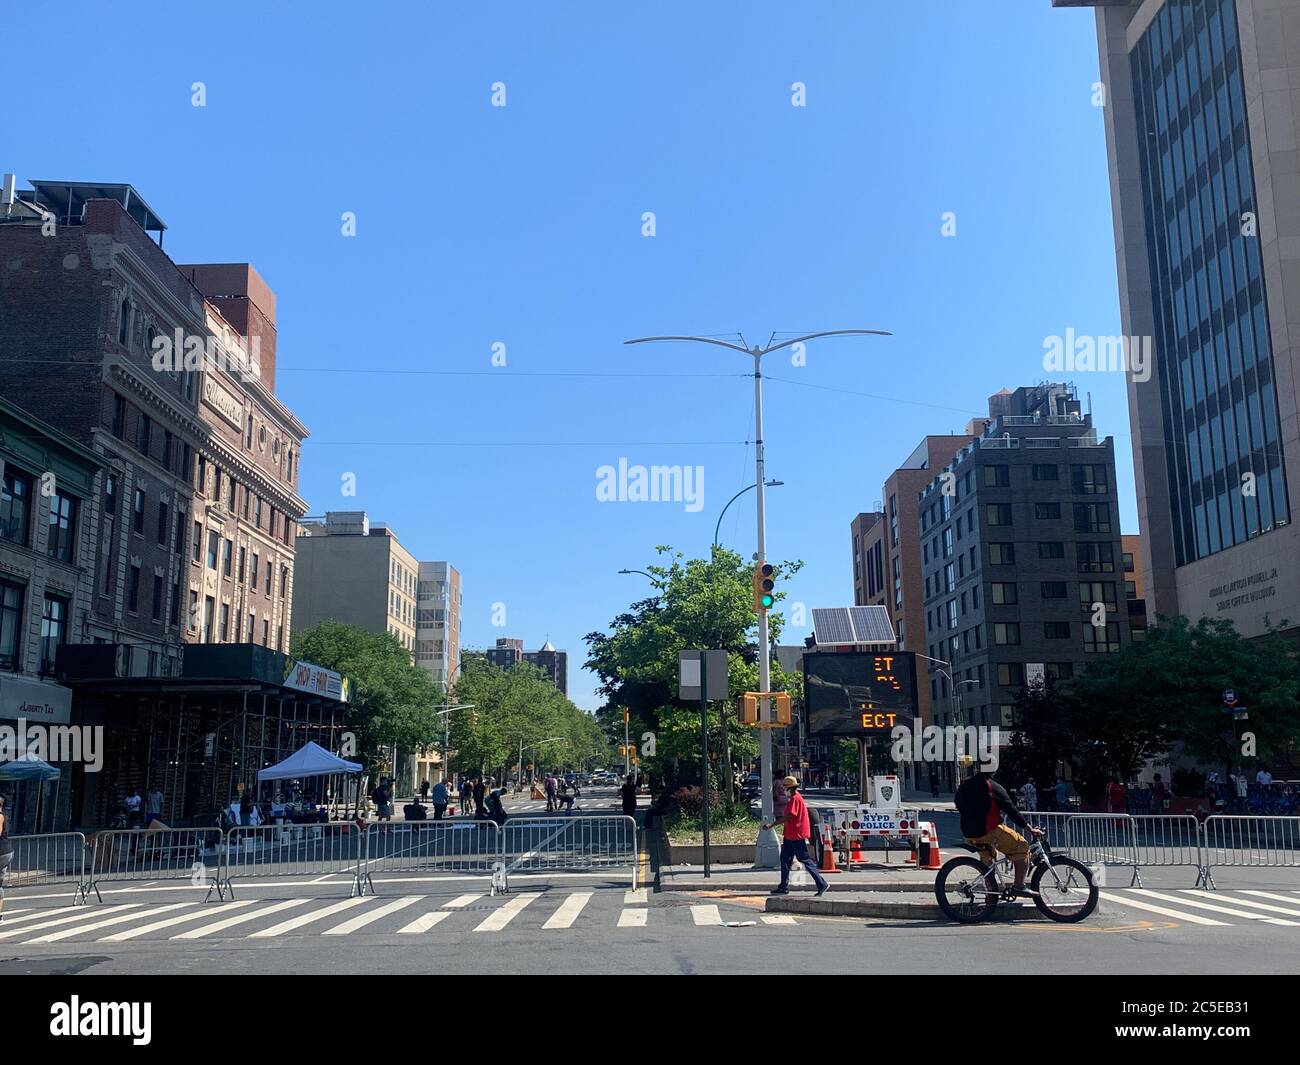 New York, USA. 2nd July, 2020. (NEW) Black lives MatterÃ¢â‚¬â„¢s Mural in Harlem. July 2, 2020, Harlem, New York, USA: Adam Clayton Powell jr Avenue with W 125 to 127 streets, Harlem is closed to the public from today July 2nd till July 5th for the making of Black lives matters mural . They are protesting against the police murder of George Floyd in Minneapolis and police brutality on blacks .Credit : Niyi Fote/Thenews2 Credit: Niyi Fote/TheNEWS2/ZUMA Wire/Alamy Live News Stock Photo